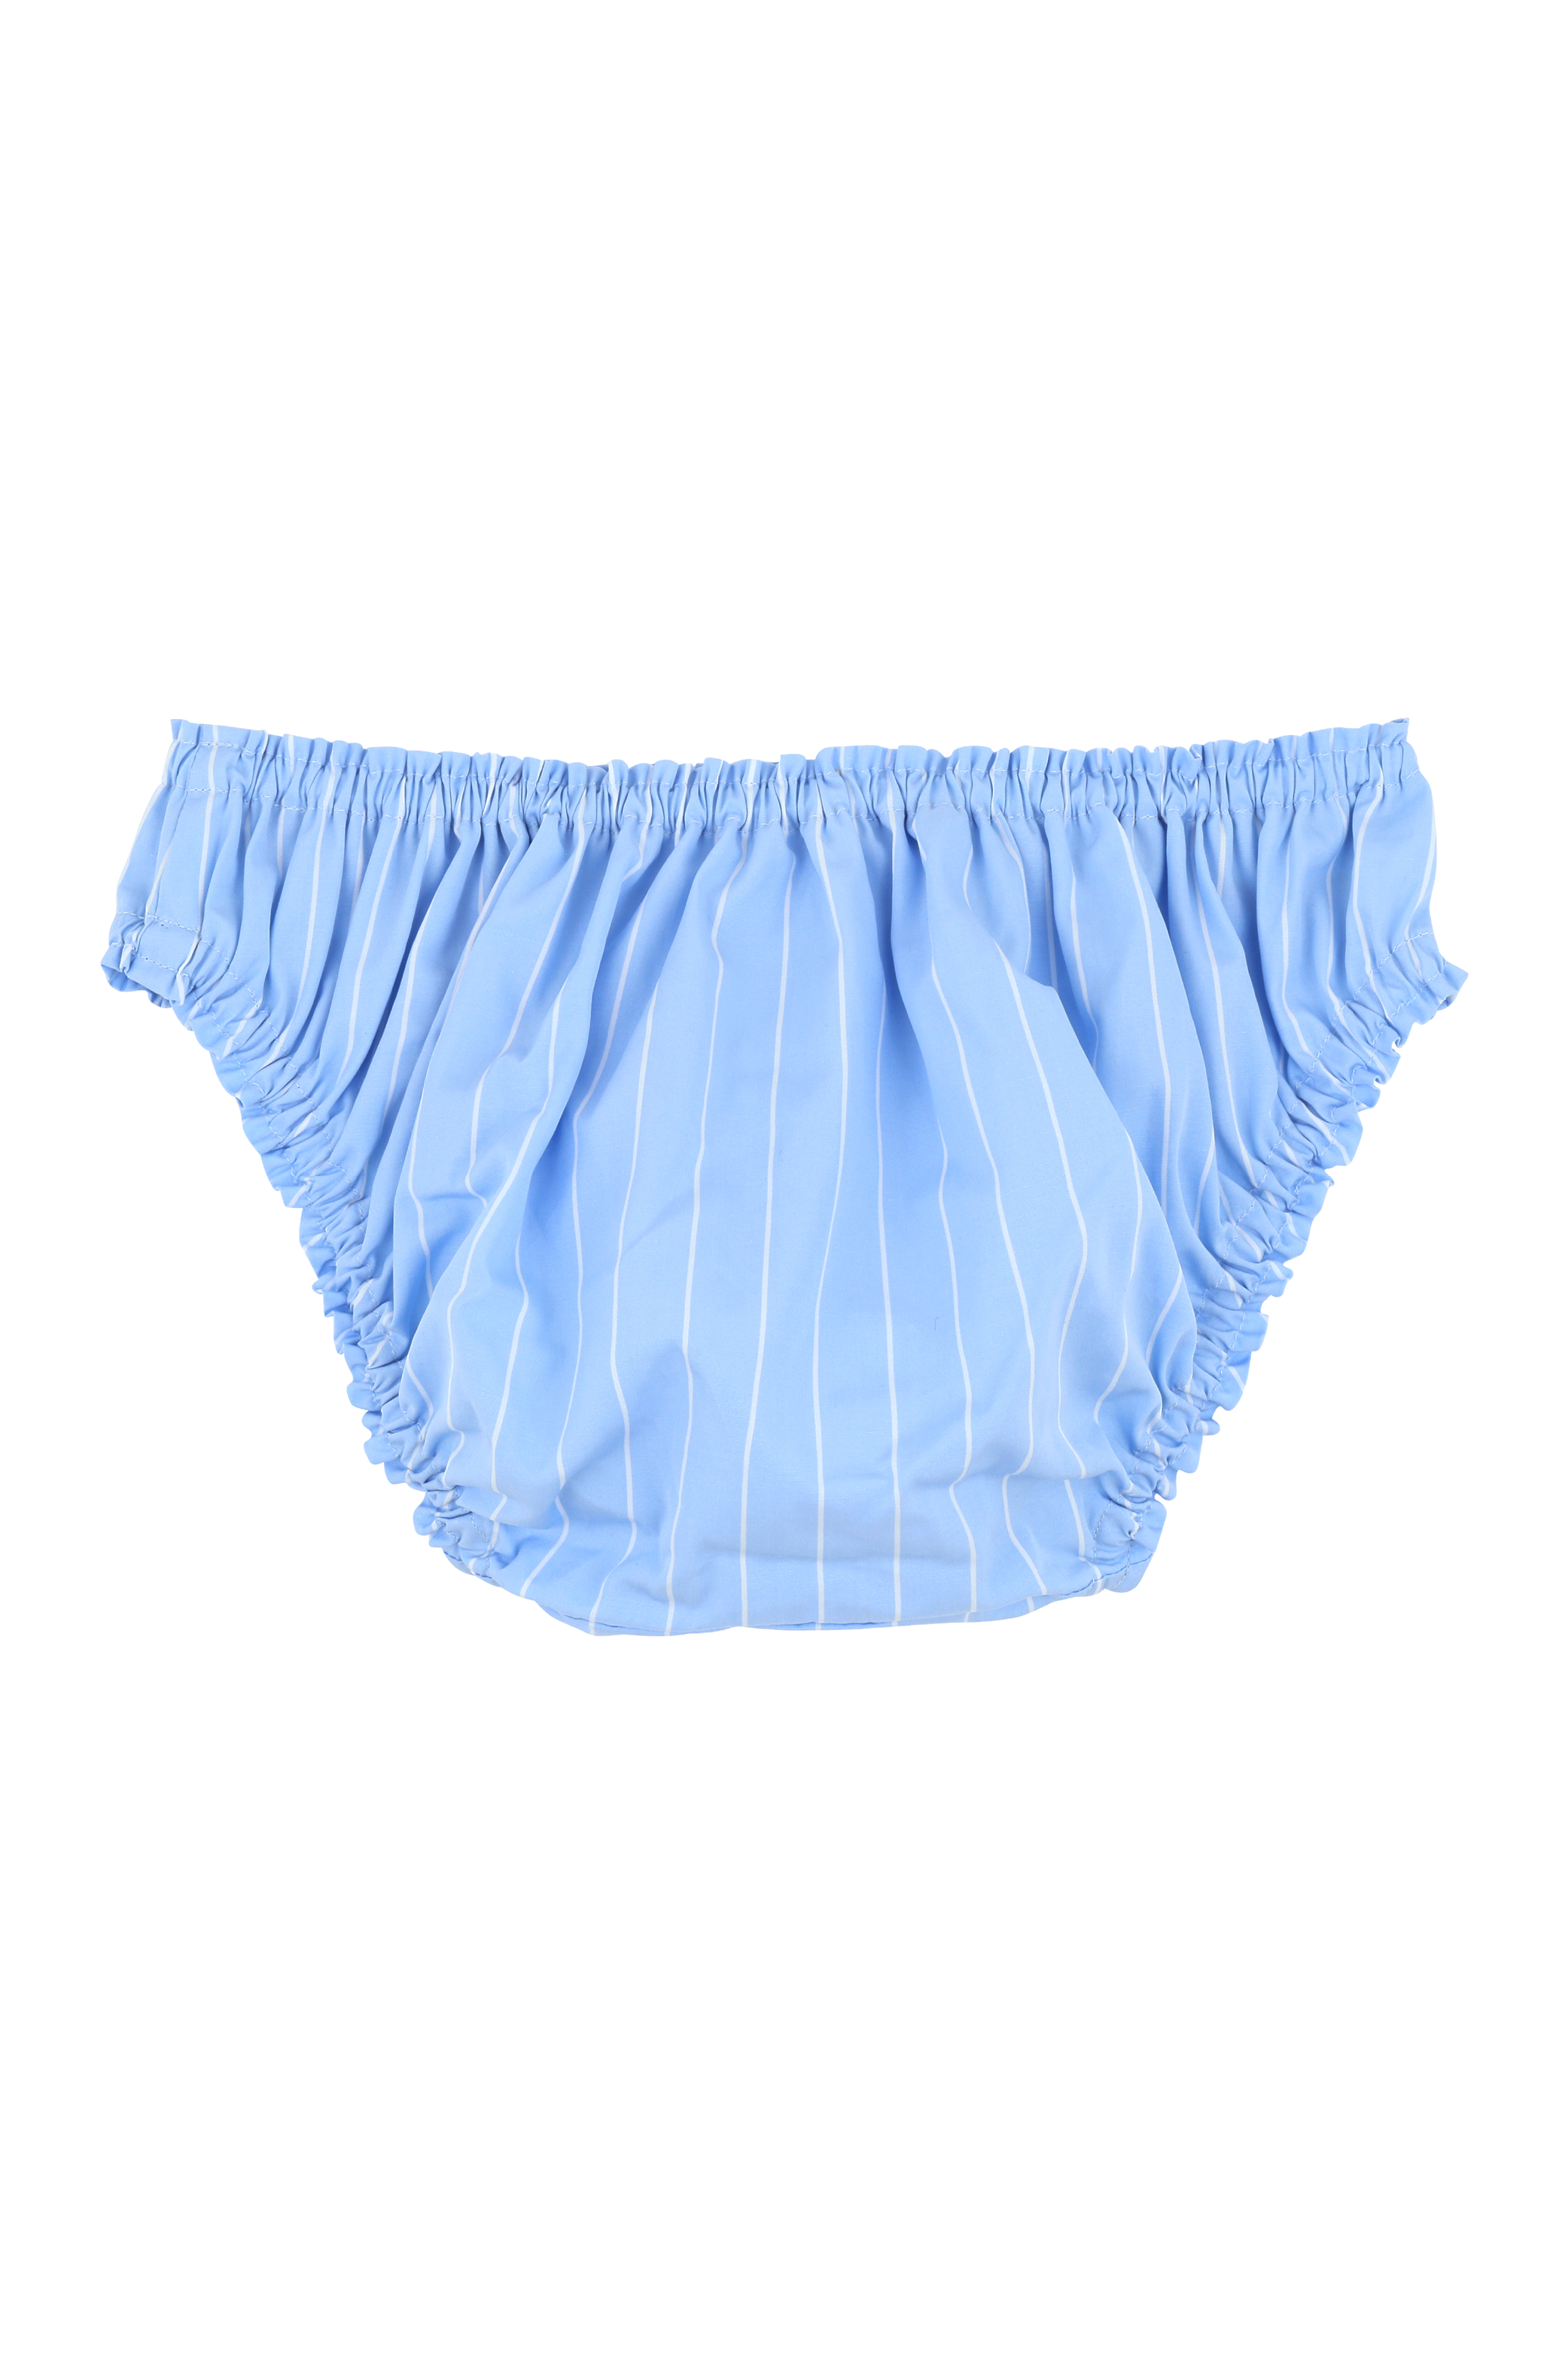 The Gina in striped blue cotton broadcloth